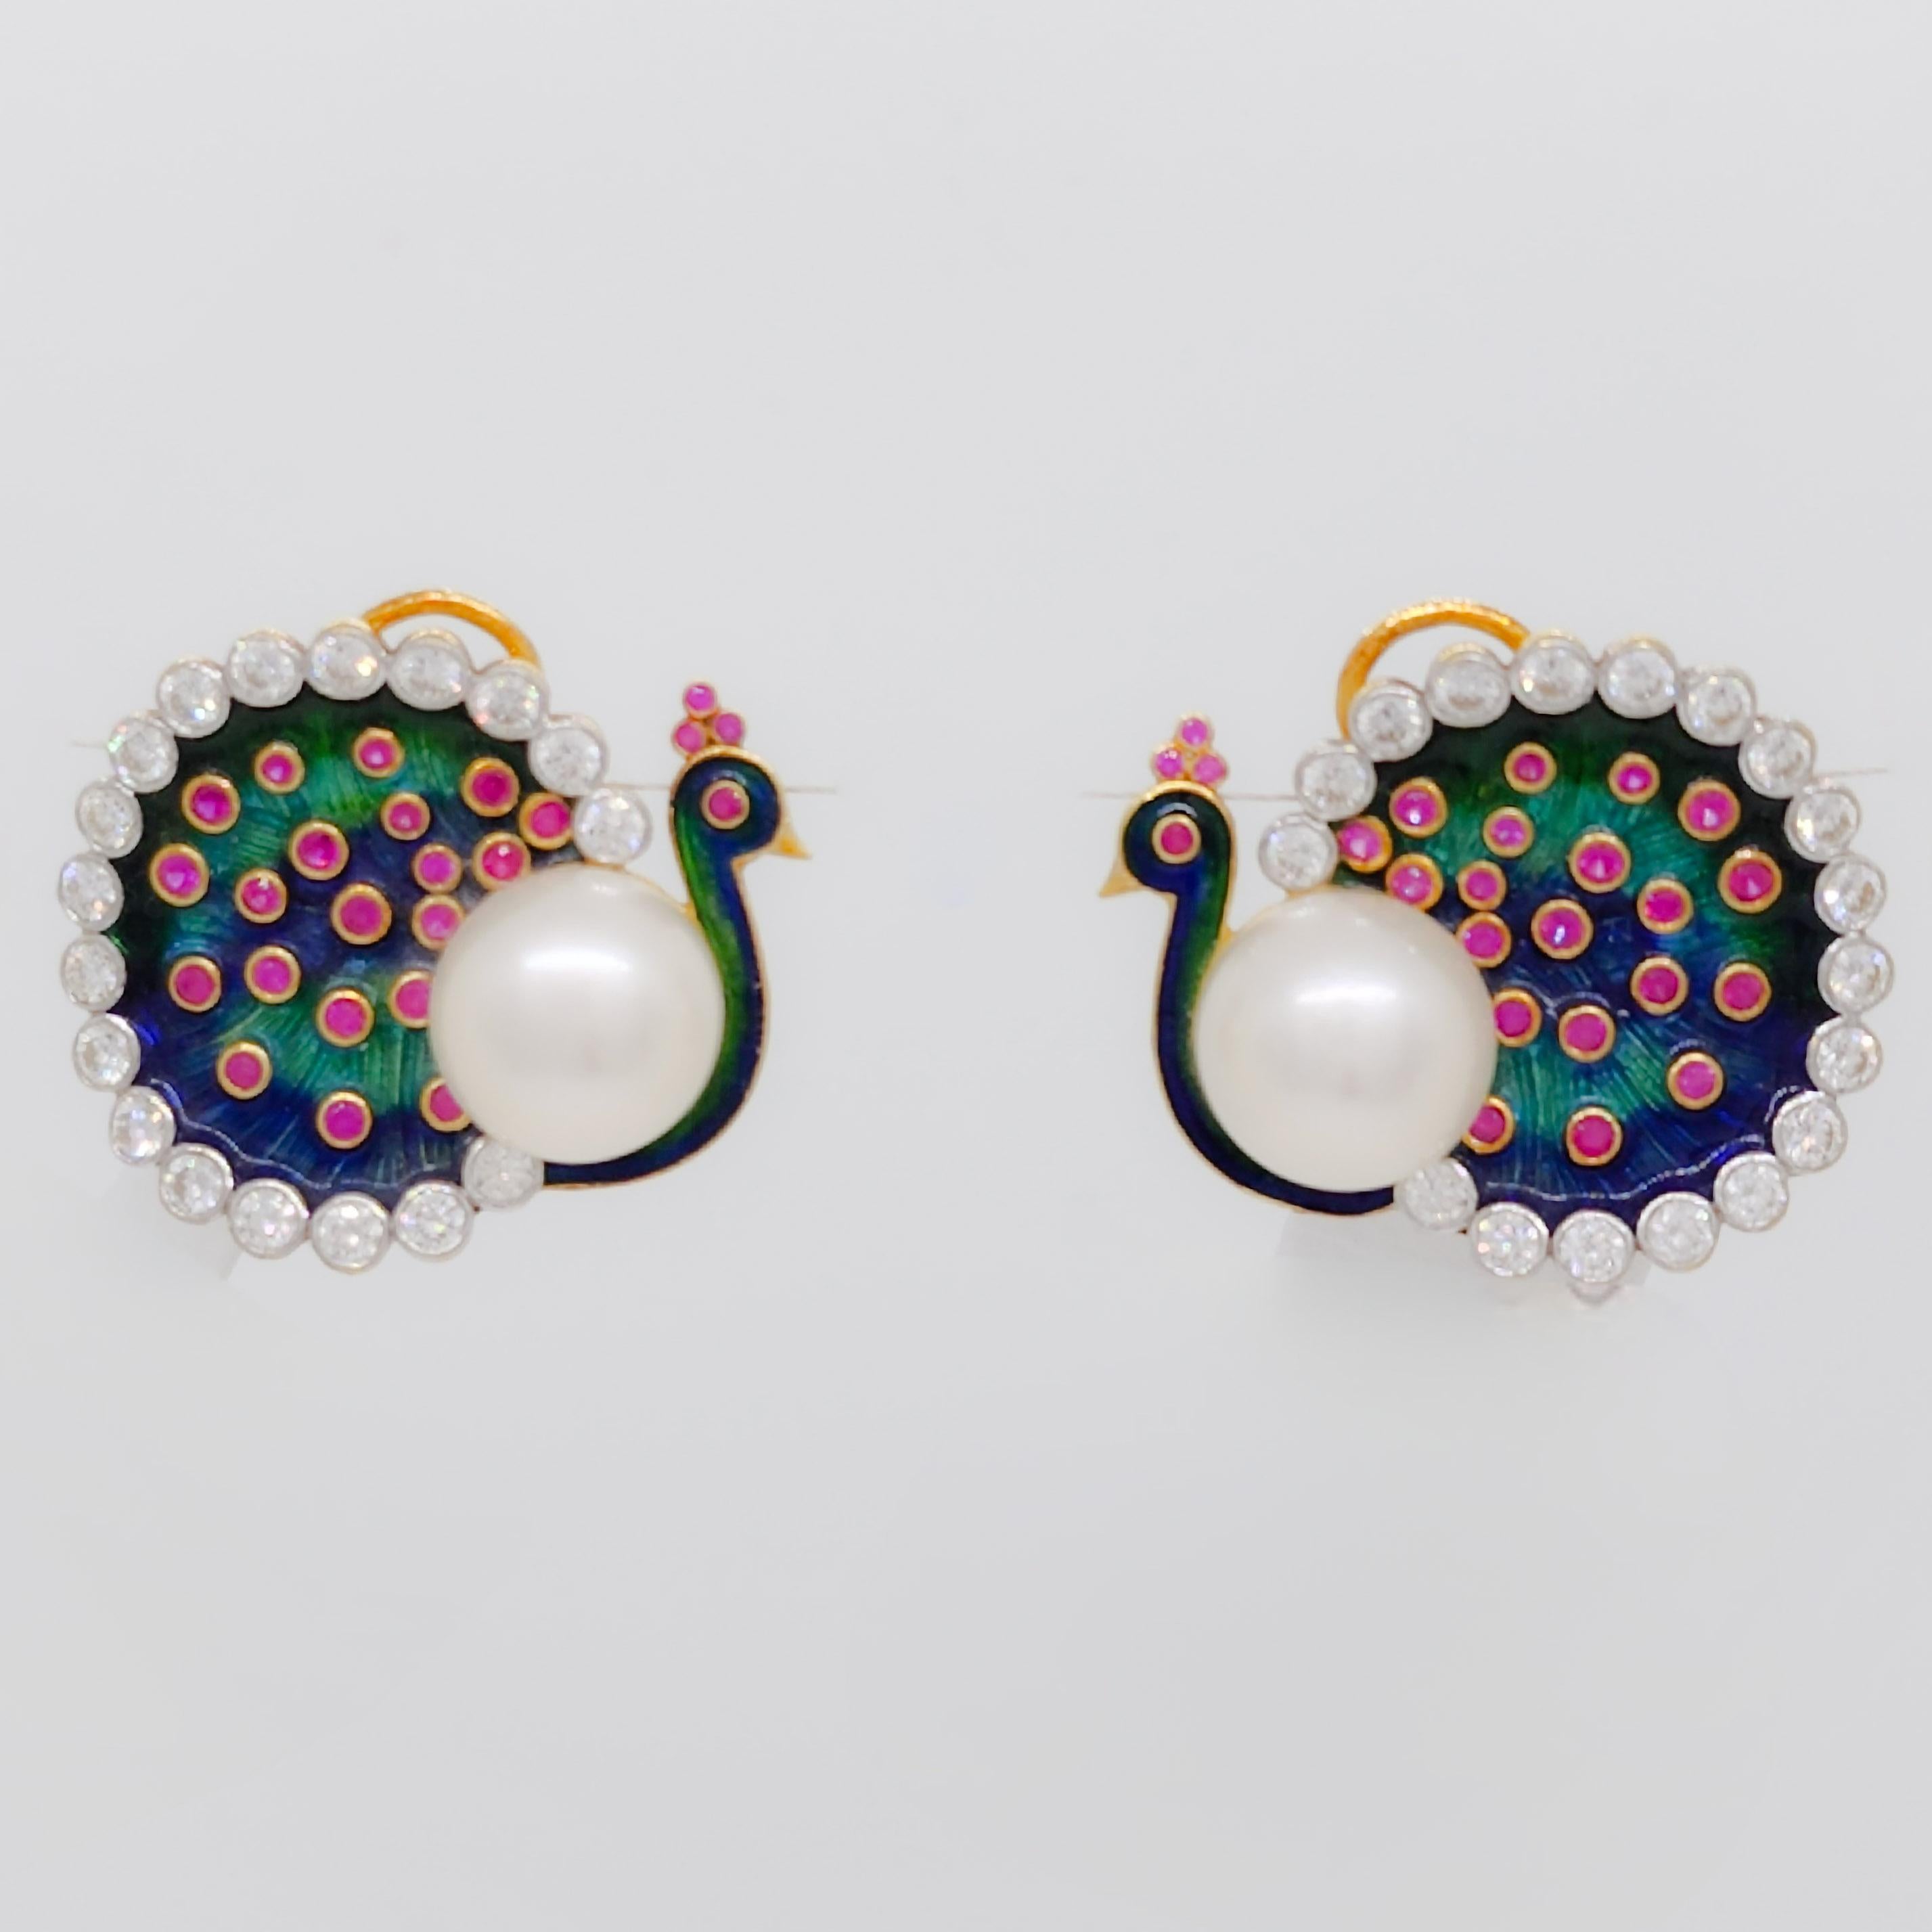 Absolutely stunning peacock design earrings with white diamond rounds, South Sea pearls, and enamel work.  Handmade with detail in 18k yellow gold.